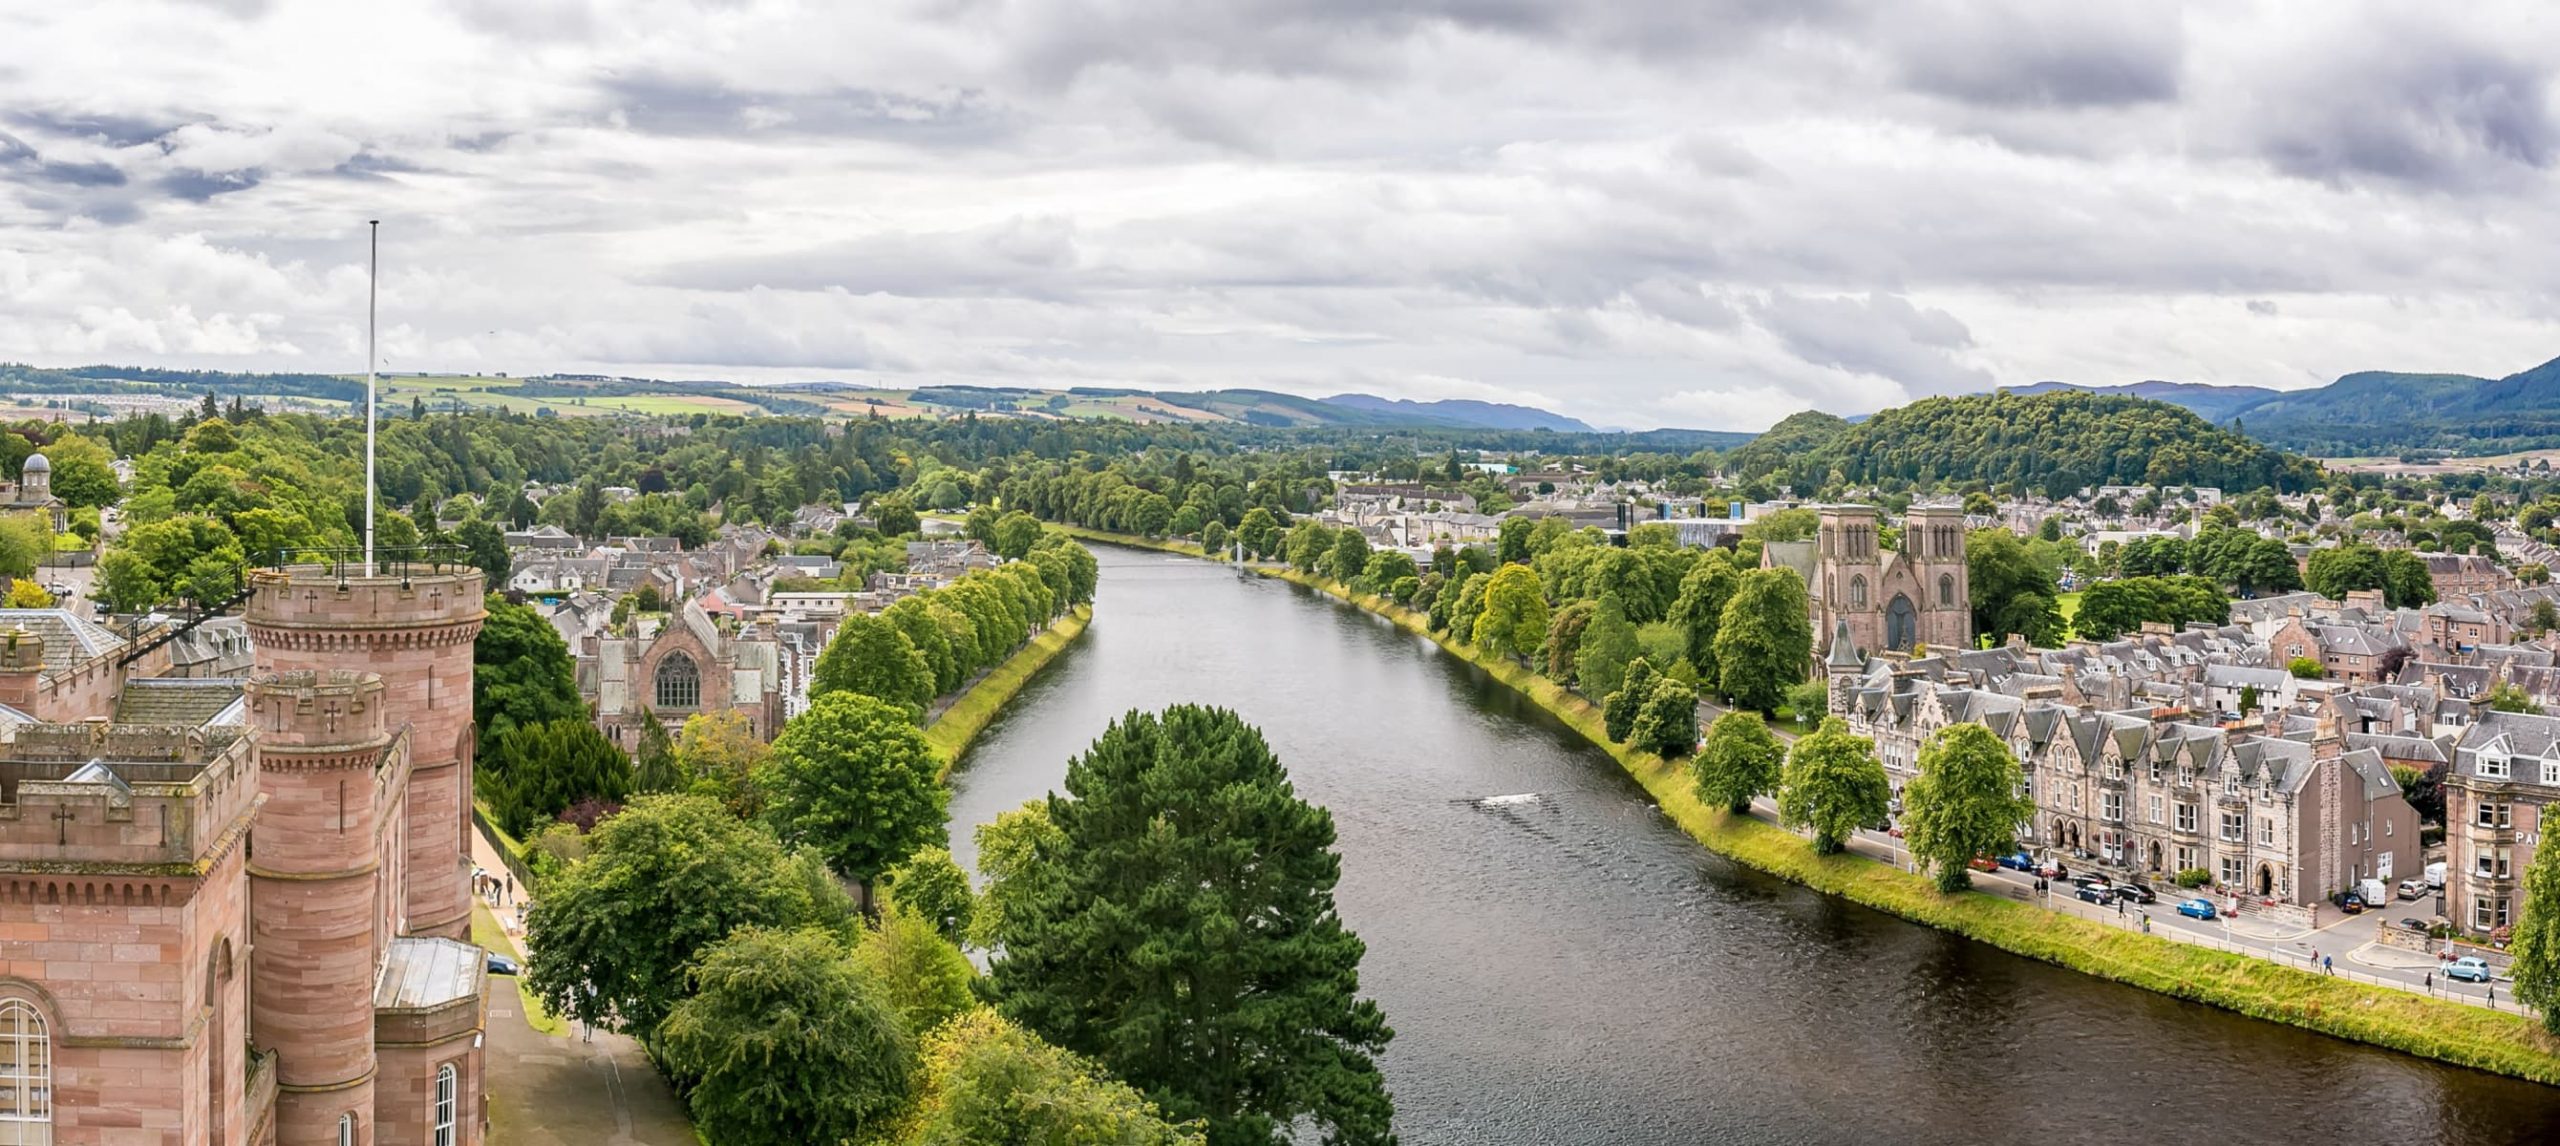 17 Bucket List Things to do in Inverness, Scotland